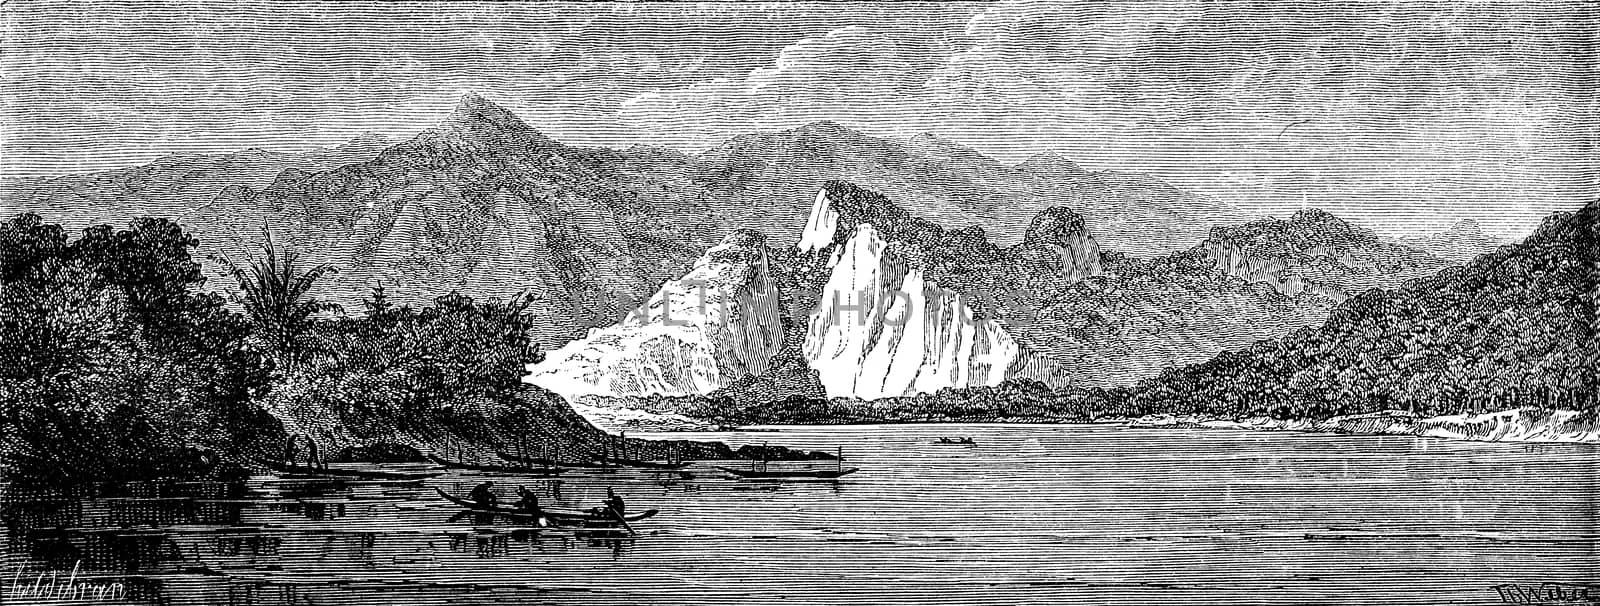 View of the river before reaching the Nam Hou, vintage engraving by Morphart